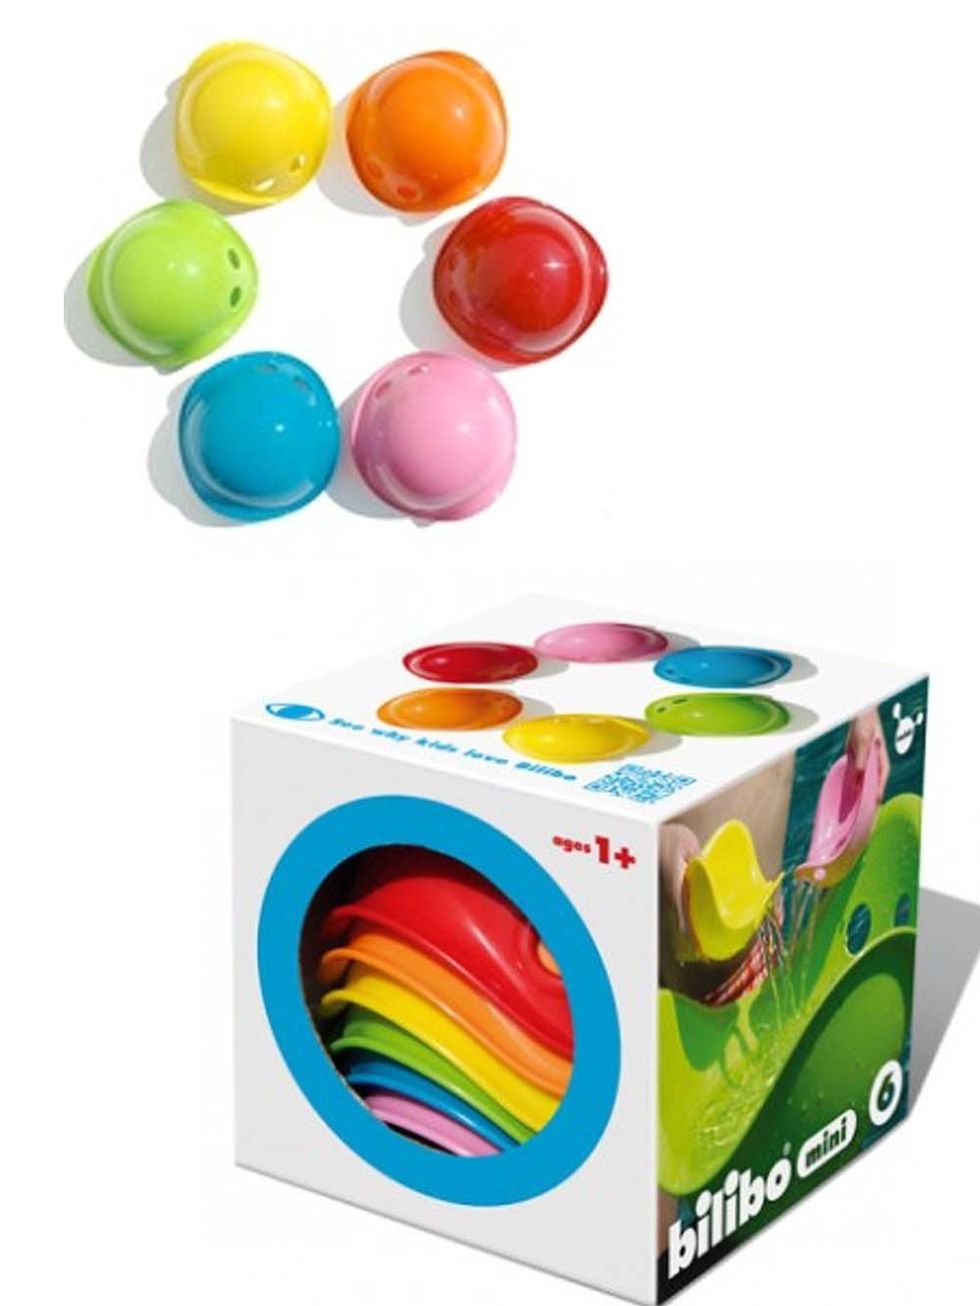 Colorfulness, Aqua, Circle, Box, Plastic, Party supply, Rainbow, Packaging and labeling, Balloon, 